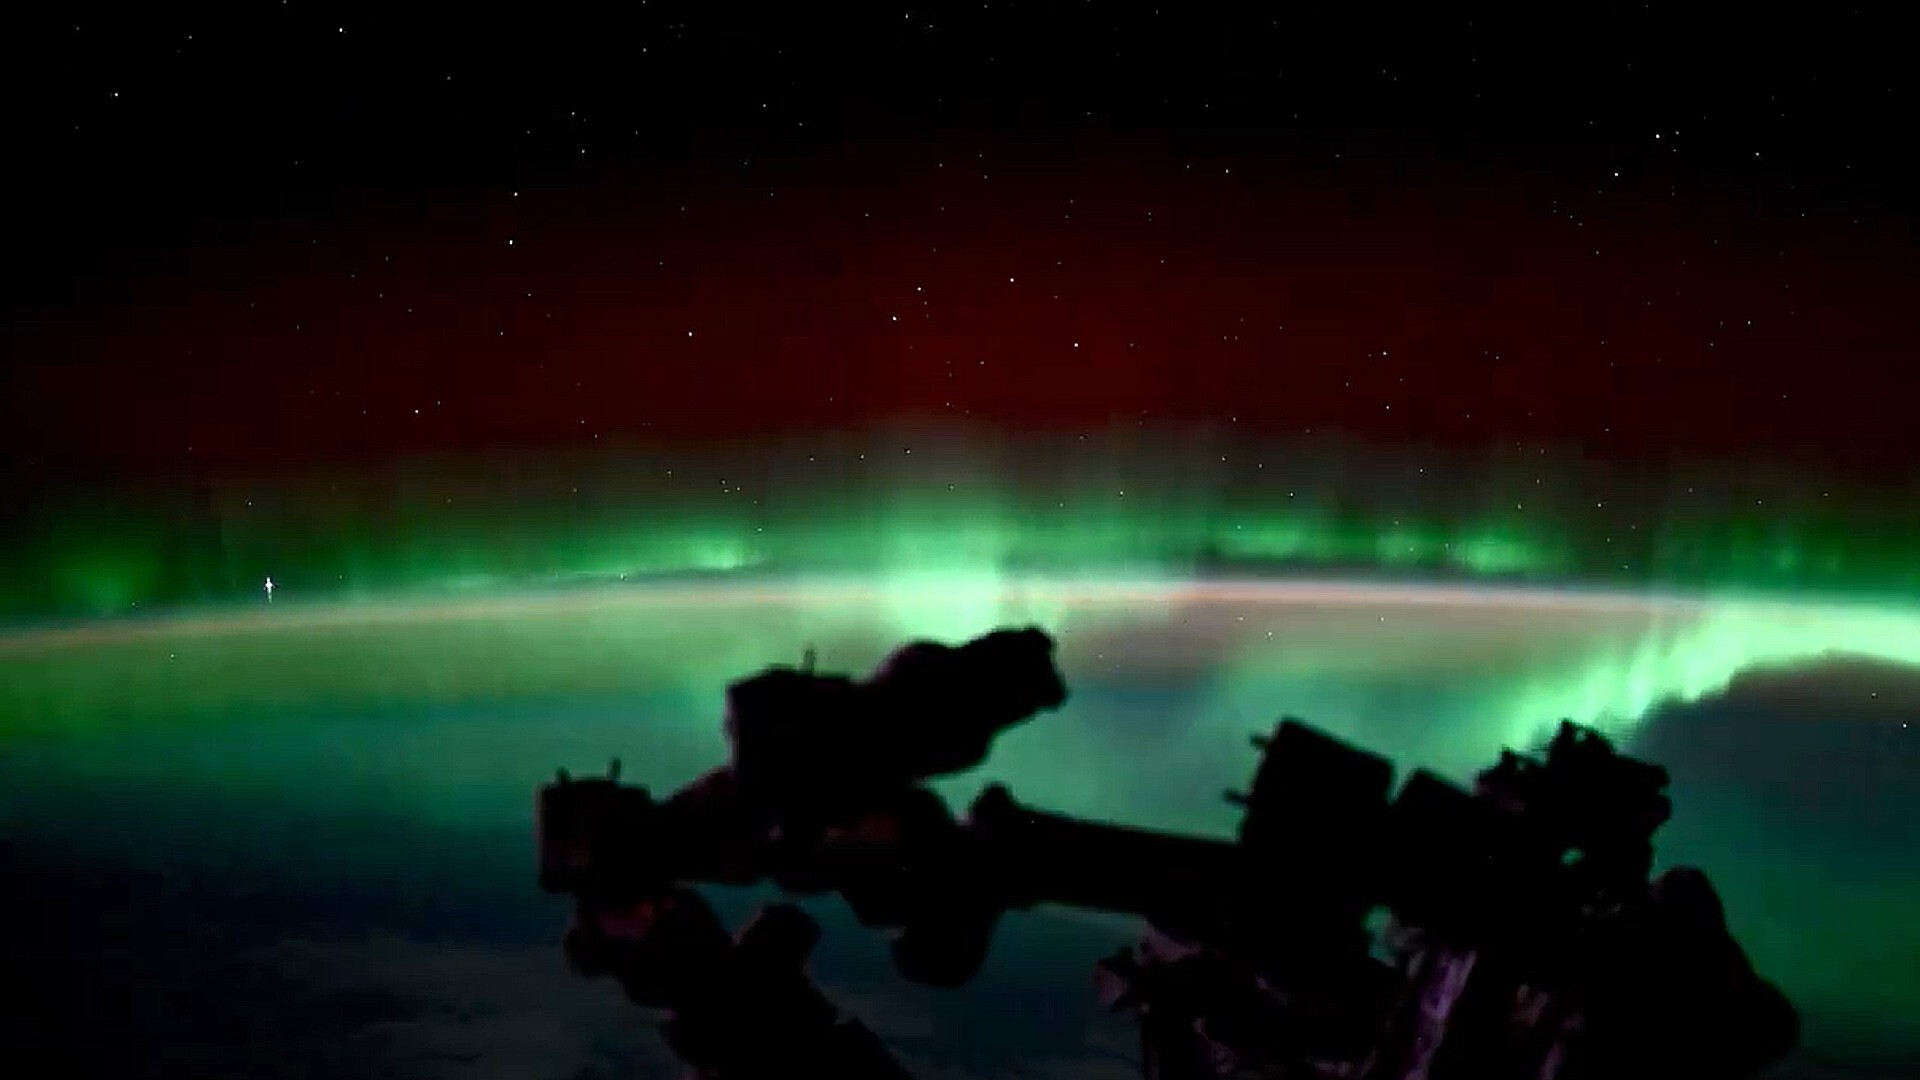 ISS astronaut captures auroras and a meteor in stunning timelapse from space (video)